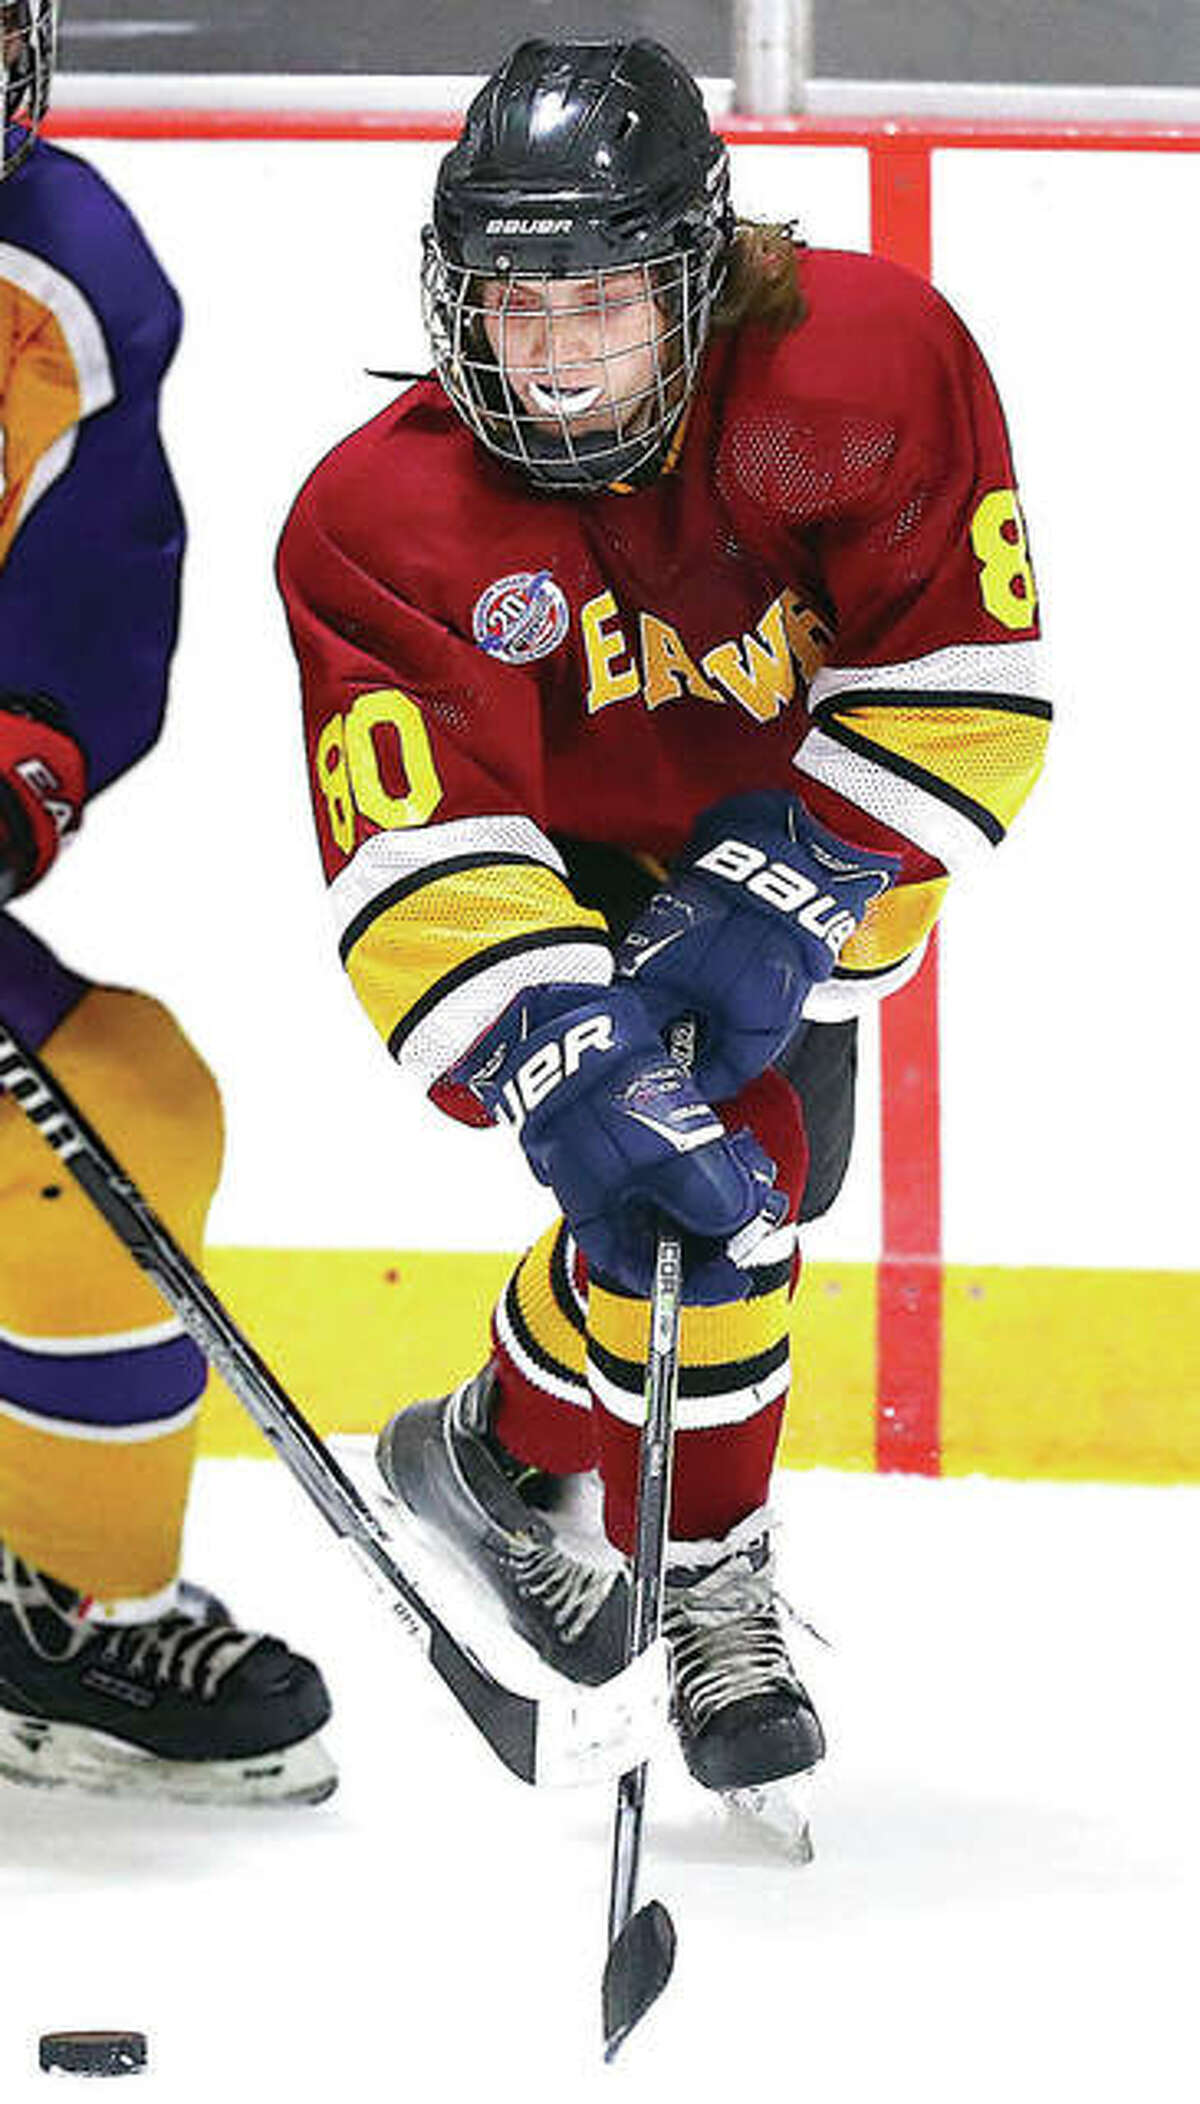 EAWR’s Isaac Lewis has been selected to the Varsity Red team for Tuesday night’s MVCHA Varsity All-Star game.